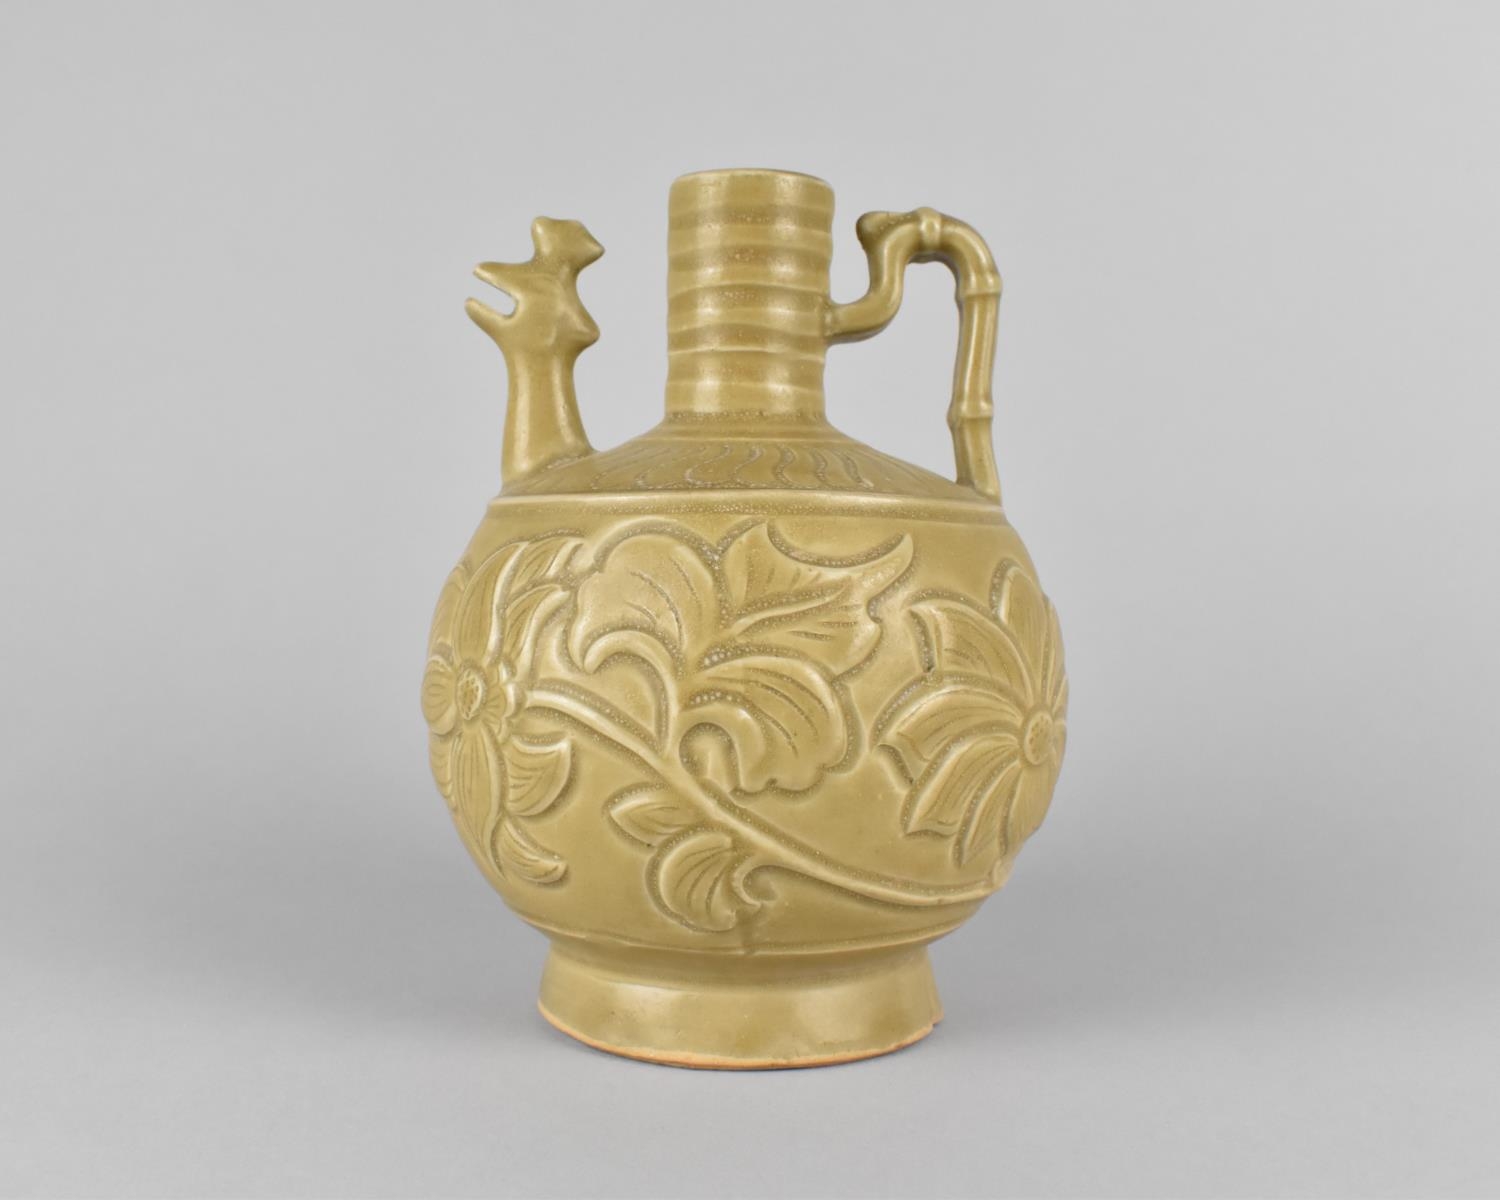 A Chinese Celadon Ewer the Body Decorated with Incised Foliage Design and Having Zoomorphic Spout,